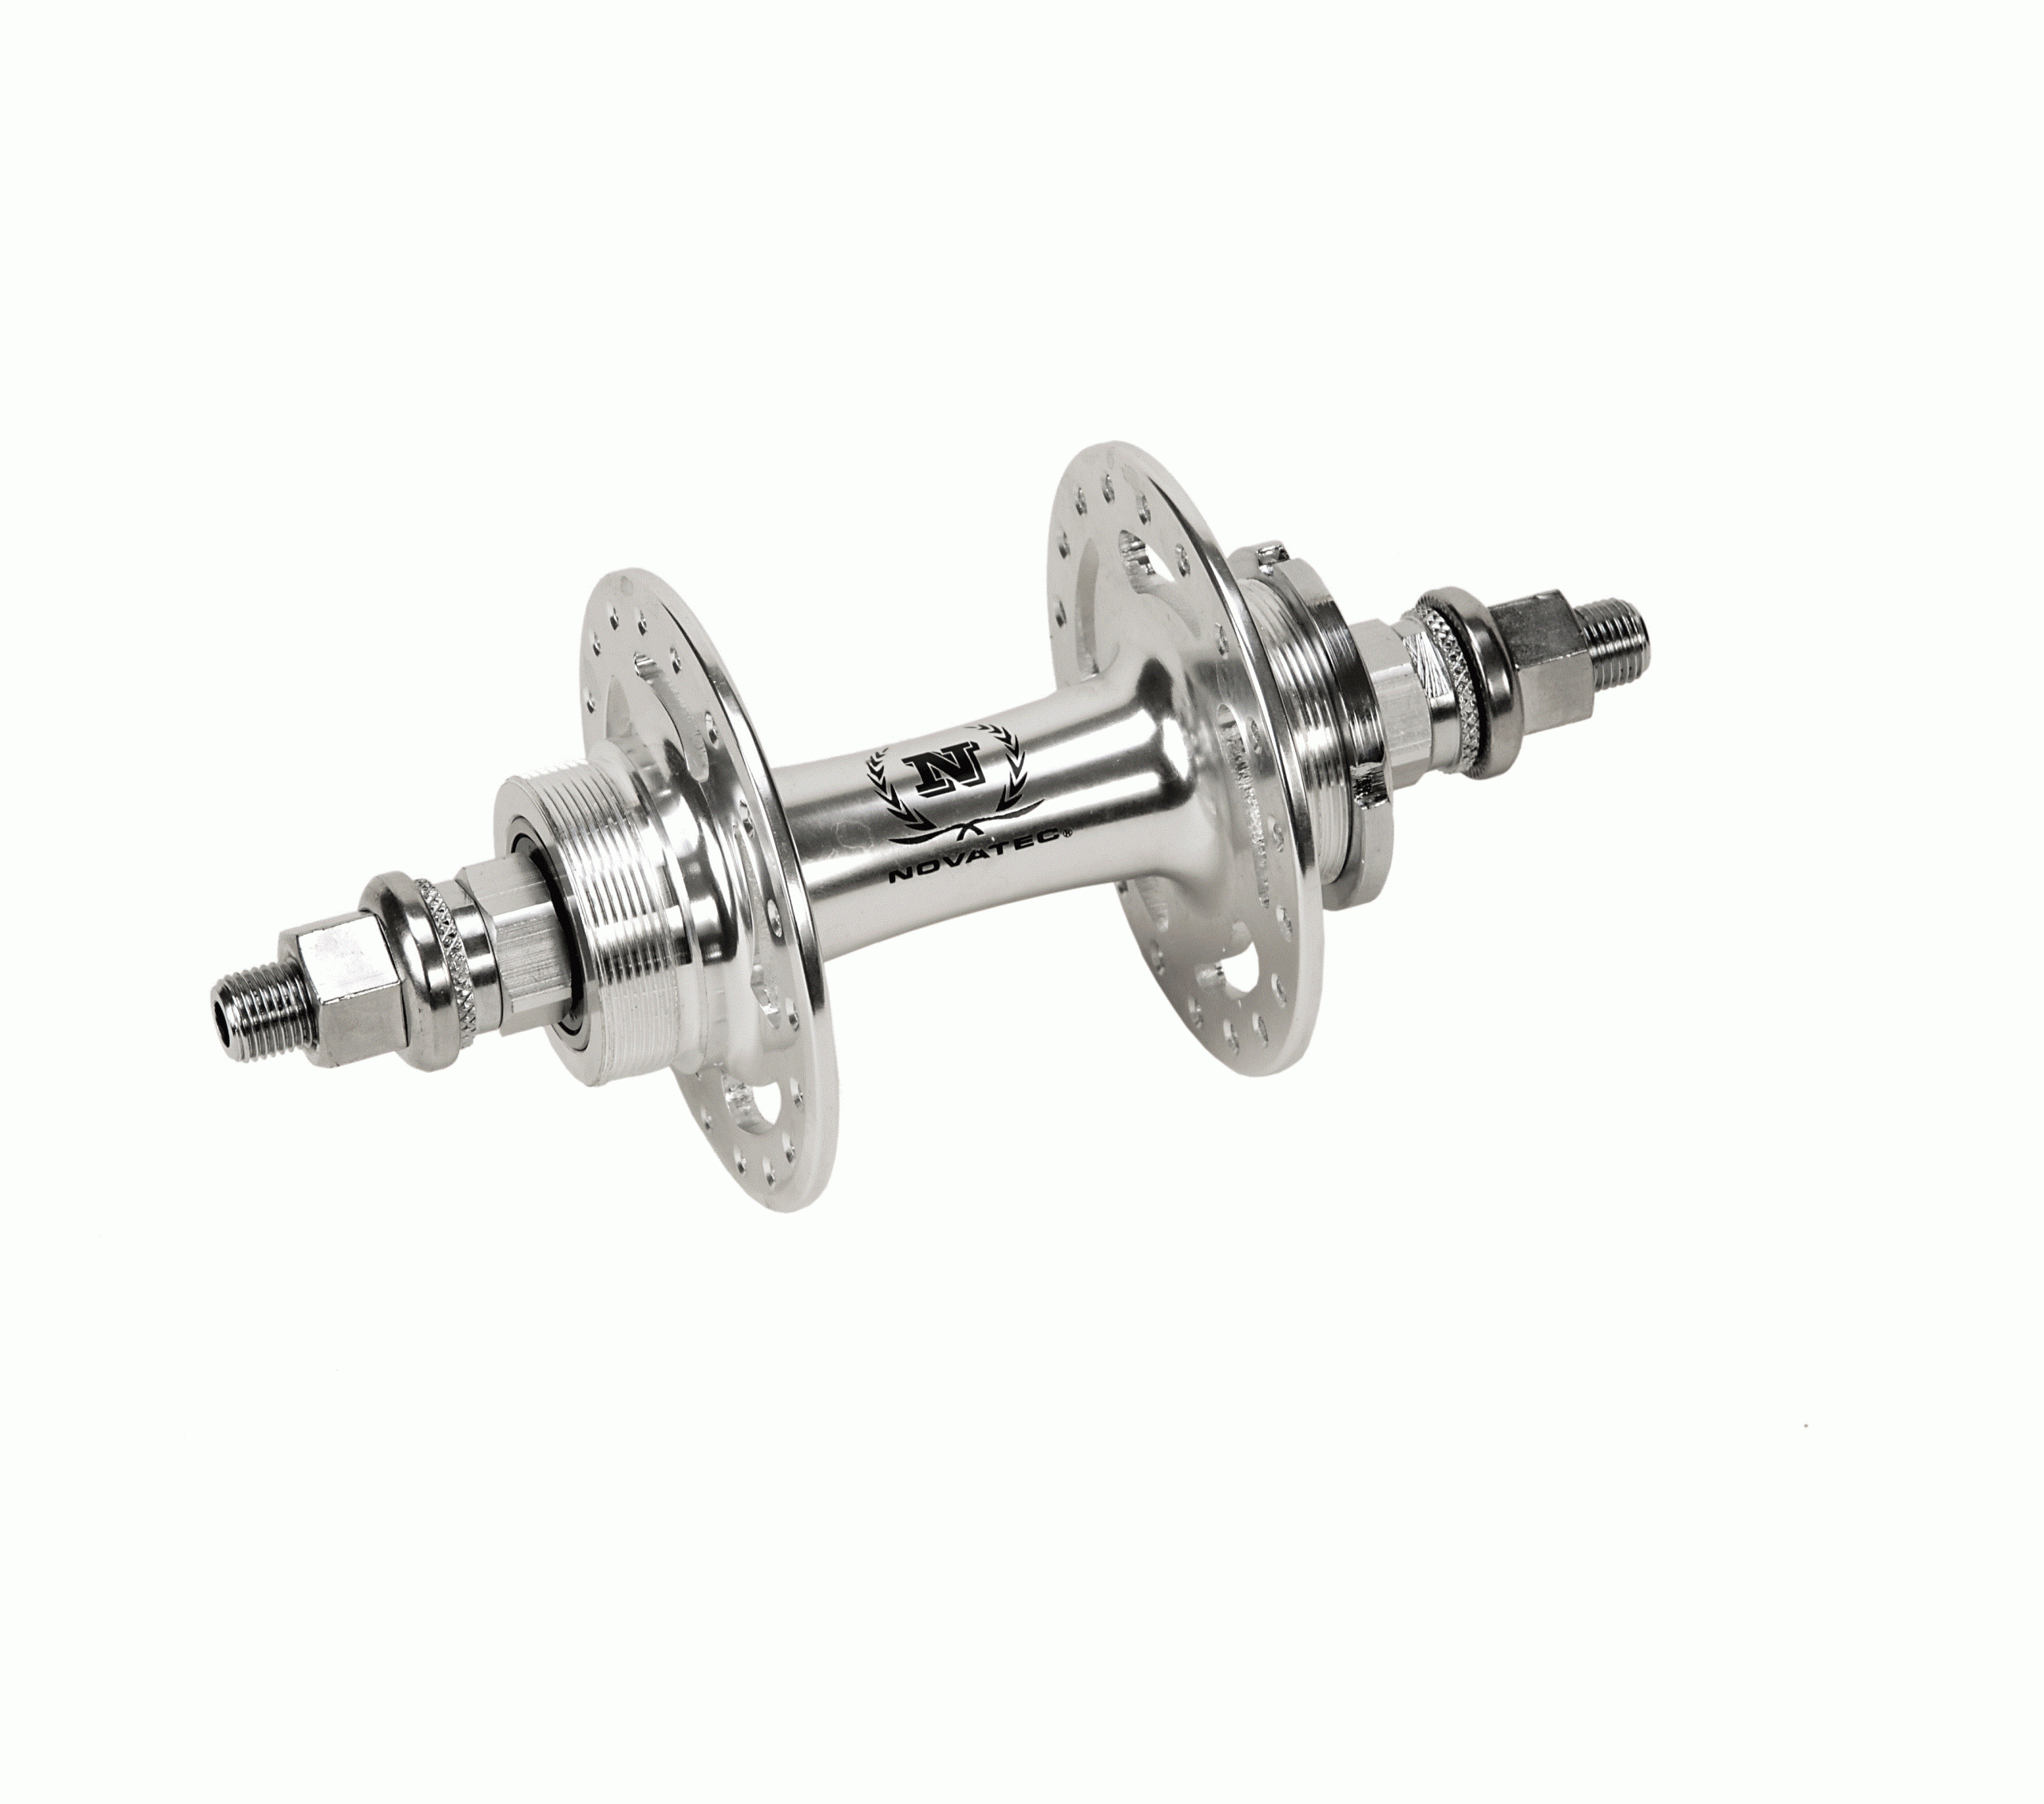 HJ850- Rear Alloy track Hub, 36H With Sealed Bearings,Double Sid